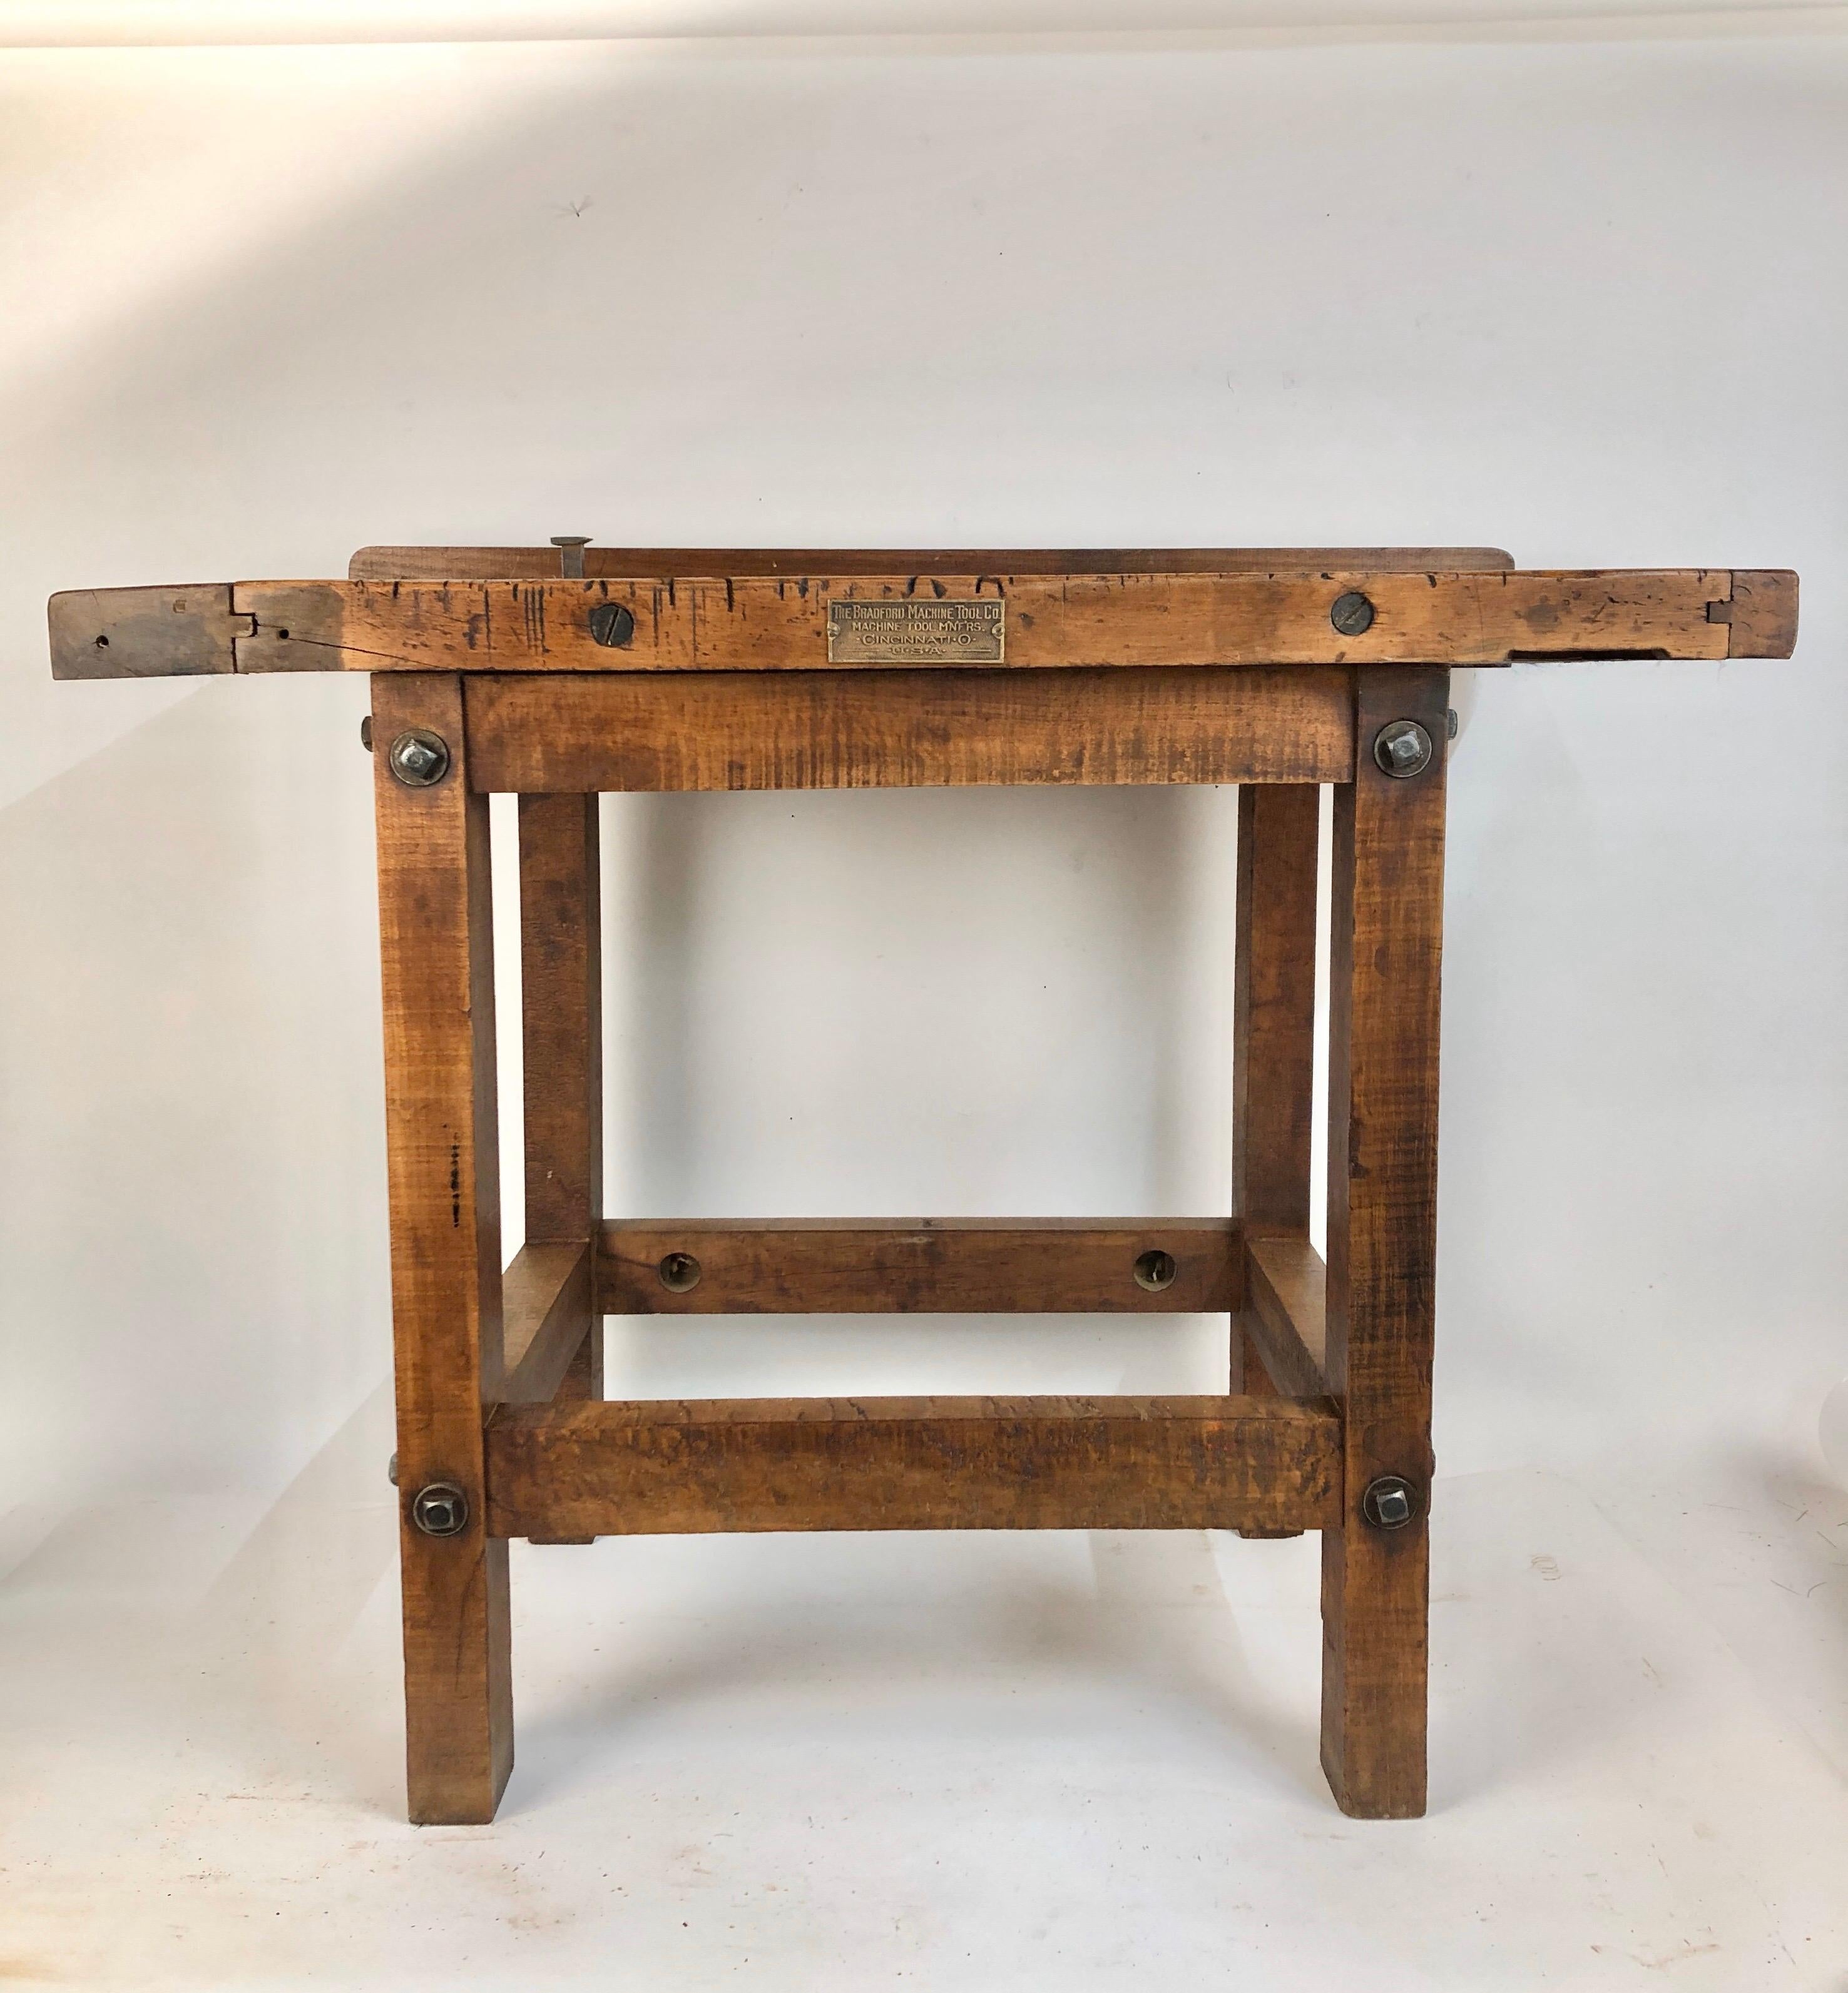 Rare small antique wood carpenters work table made by the Bradford Machine Tool Co. Cincinnati Ohio. Works perfect as a bar, kitchen island, server or entrance table. Beautiful untouched rich golden brown color with dark graining lines. Solid and